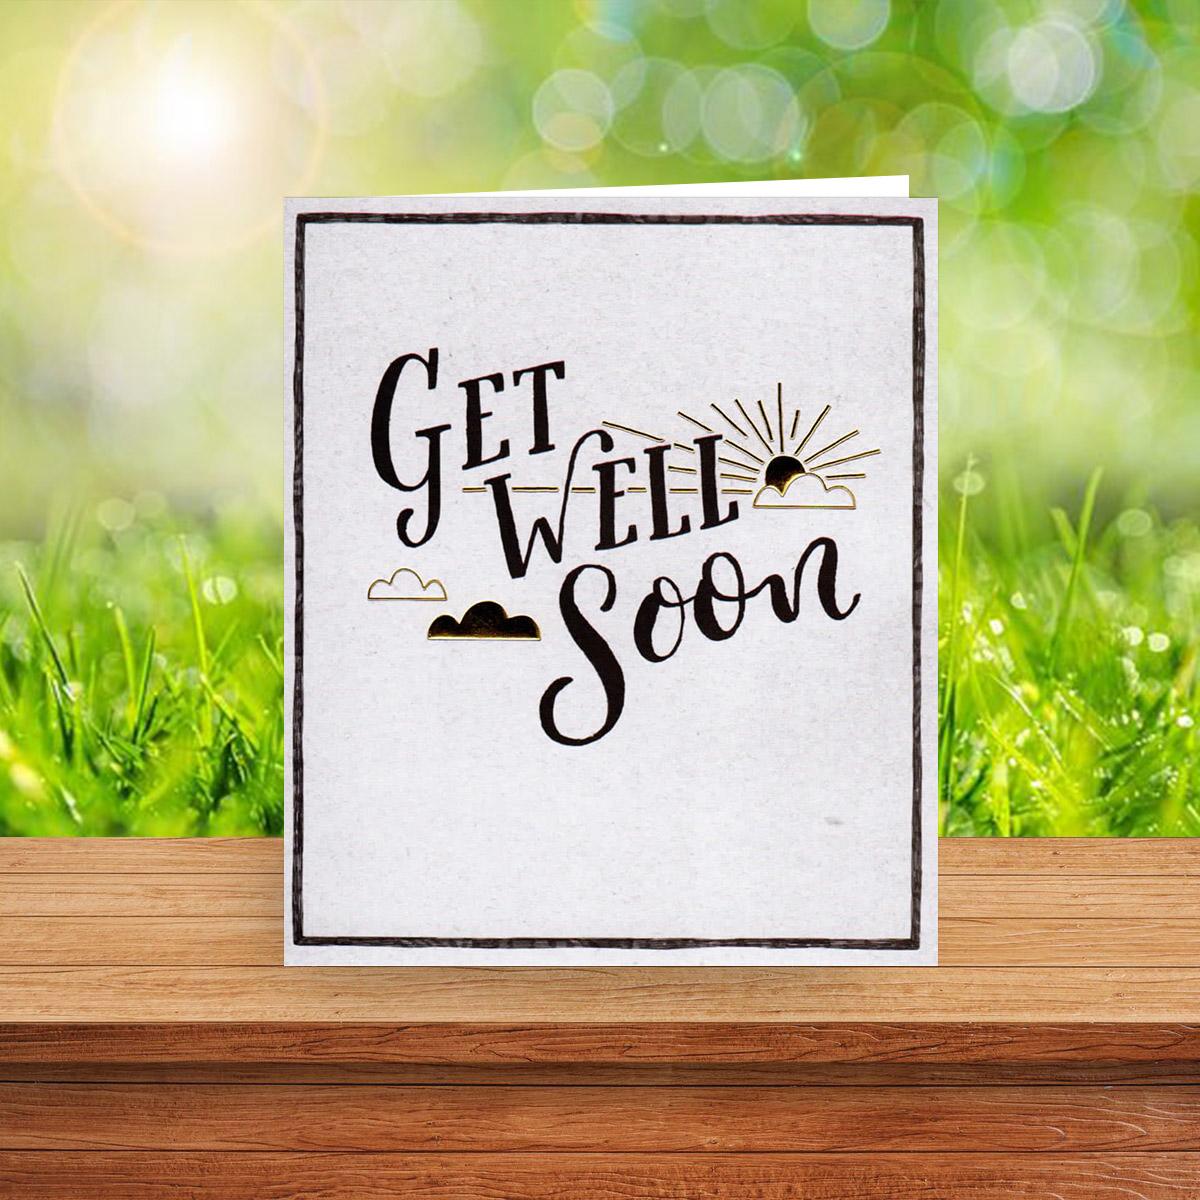 Get Well Soon Square Card Sitting On A Display Shelf